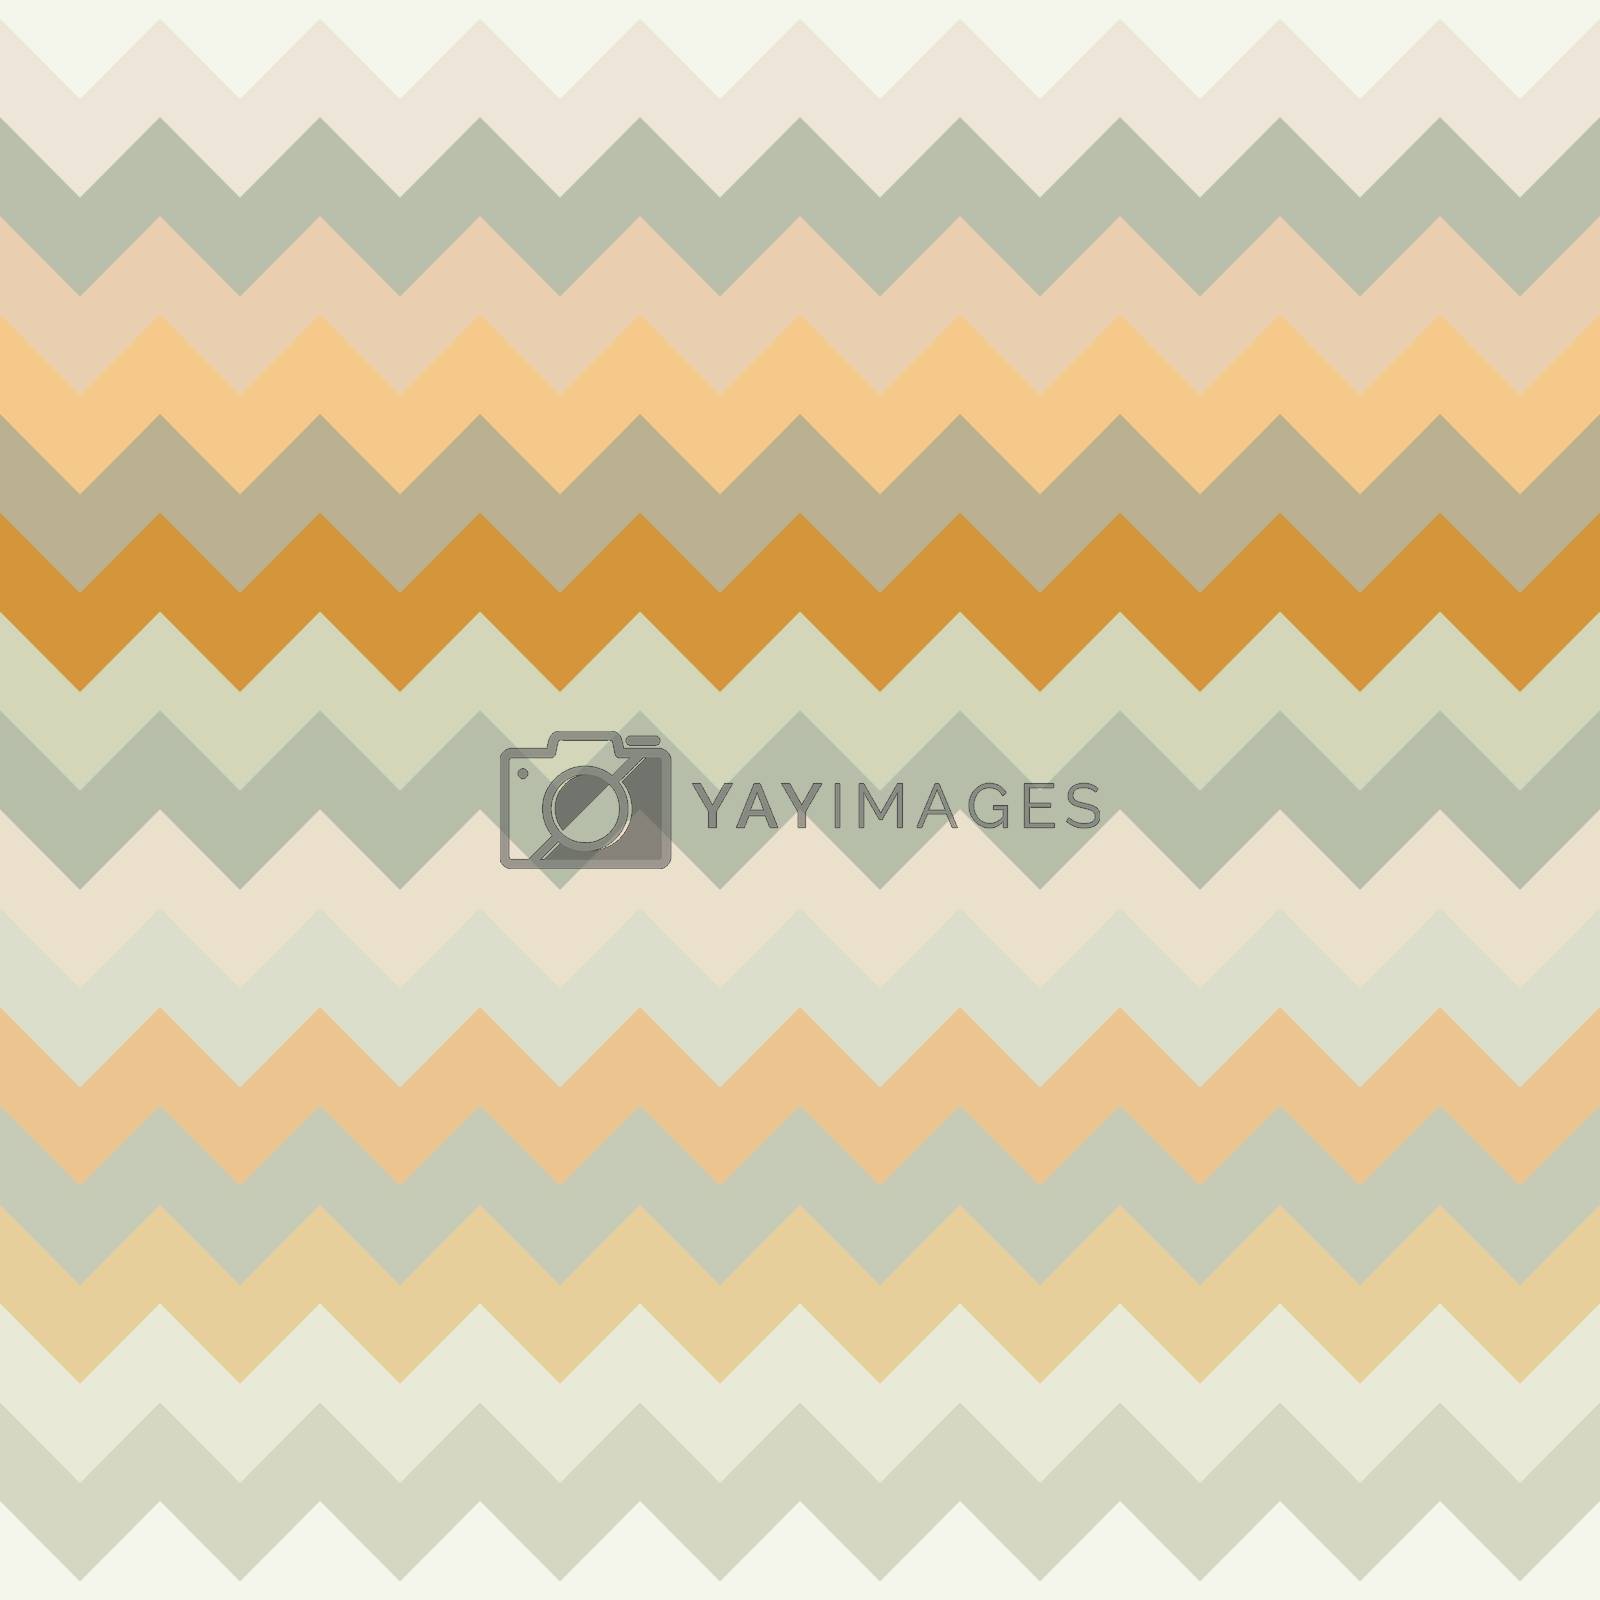 Royalty free image of Chevron Pattern by HypnoCreative